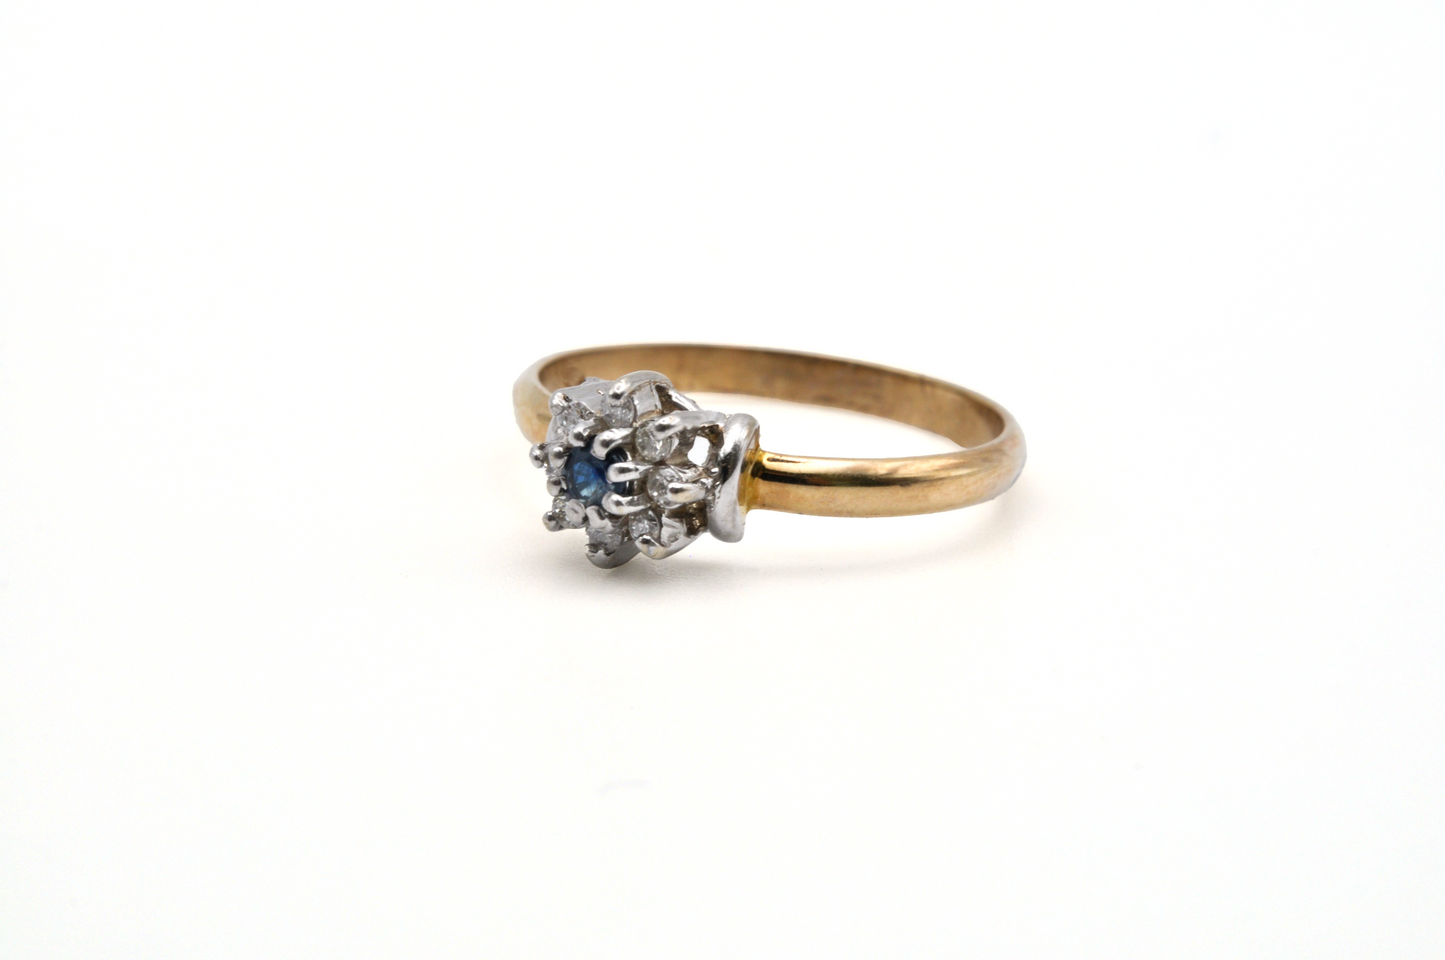 Yellow Gold Ring with Diamonds Surrounding a Blue Sapphire Center Stone